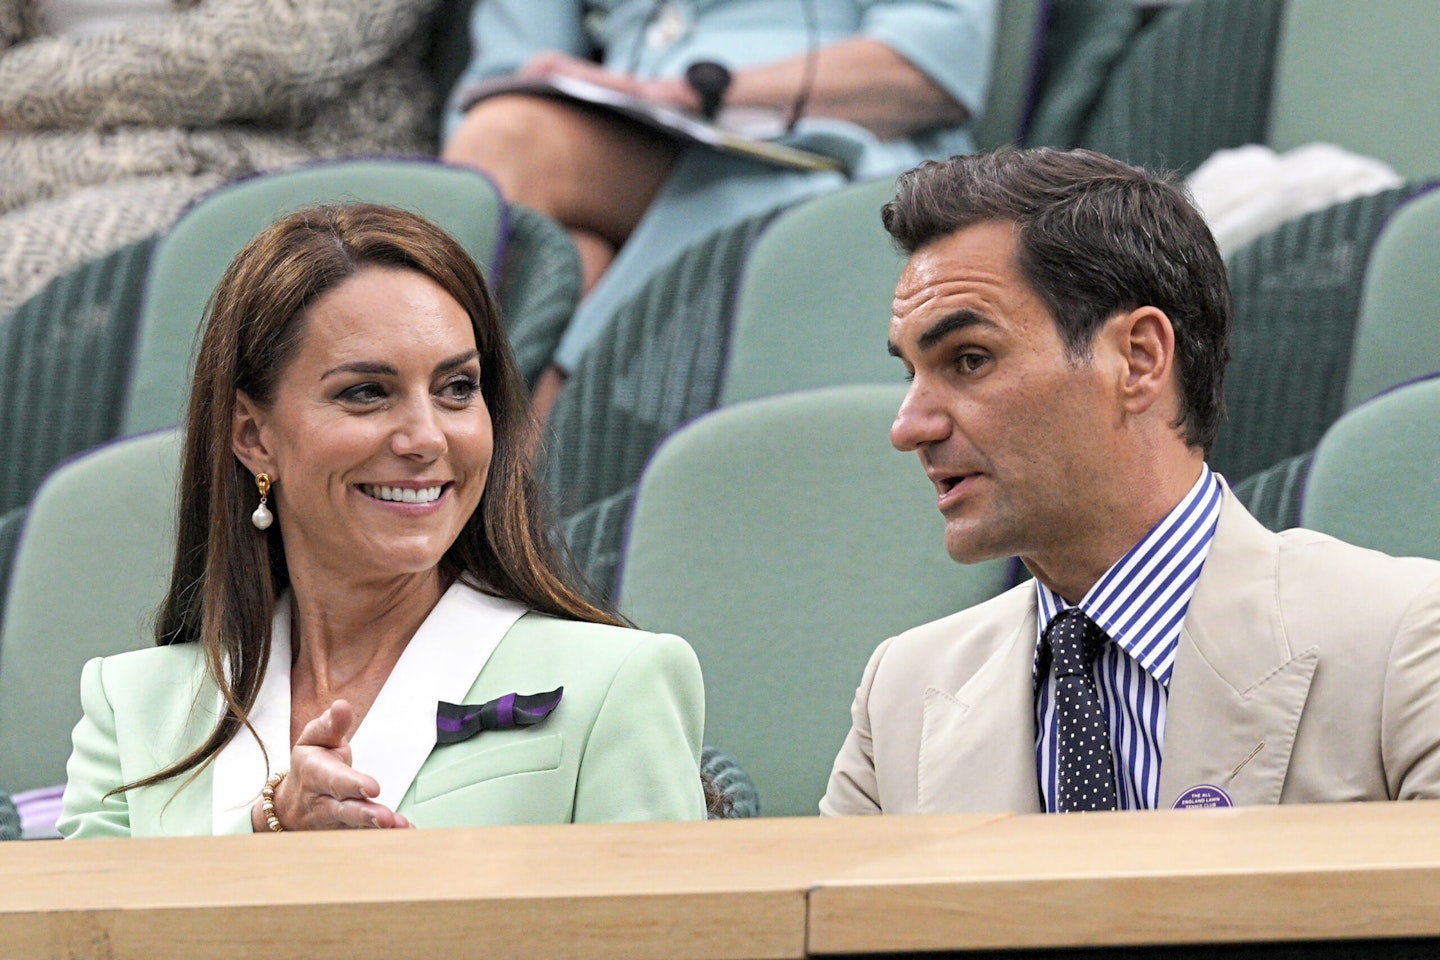 Kate She chatted to Roger Federer at Wimbledon